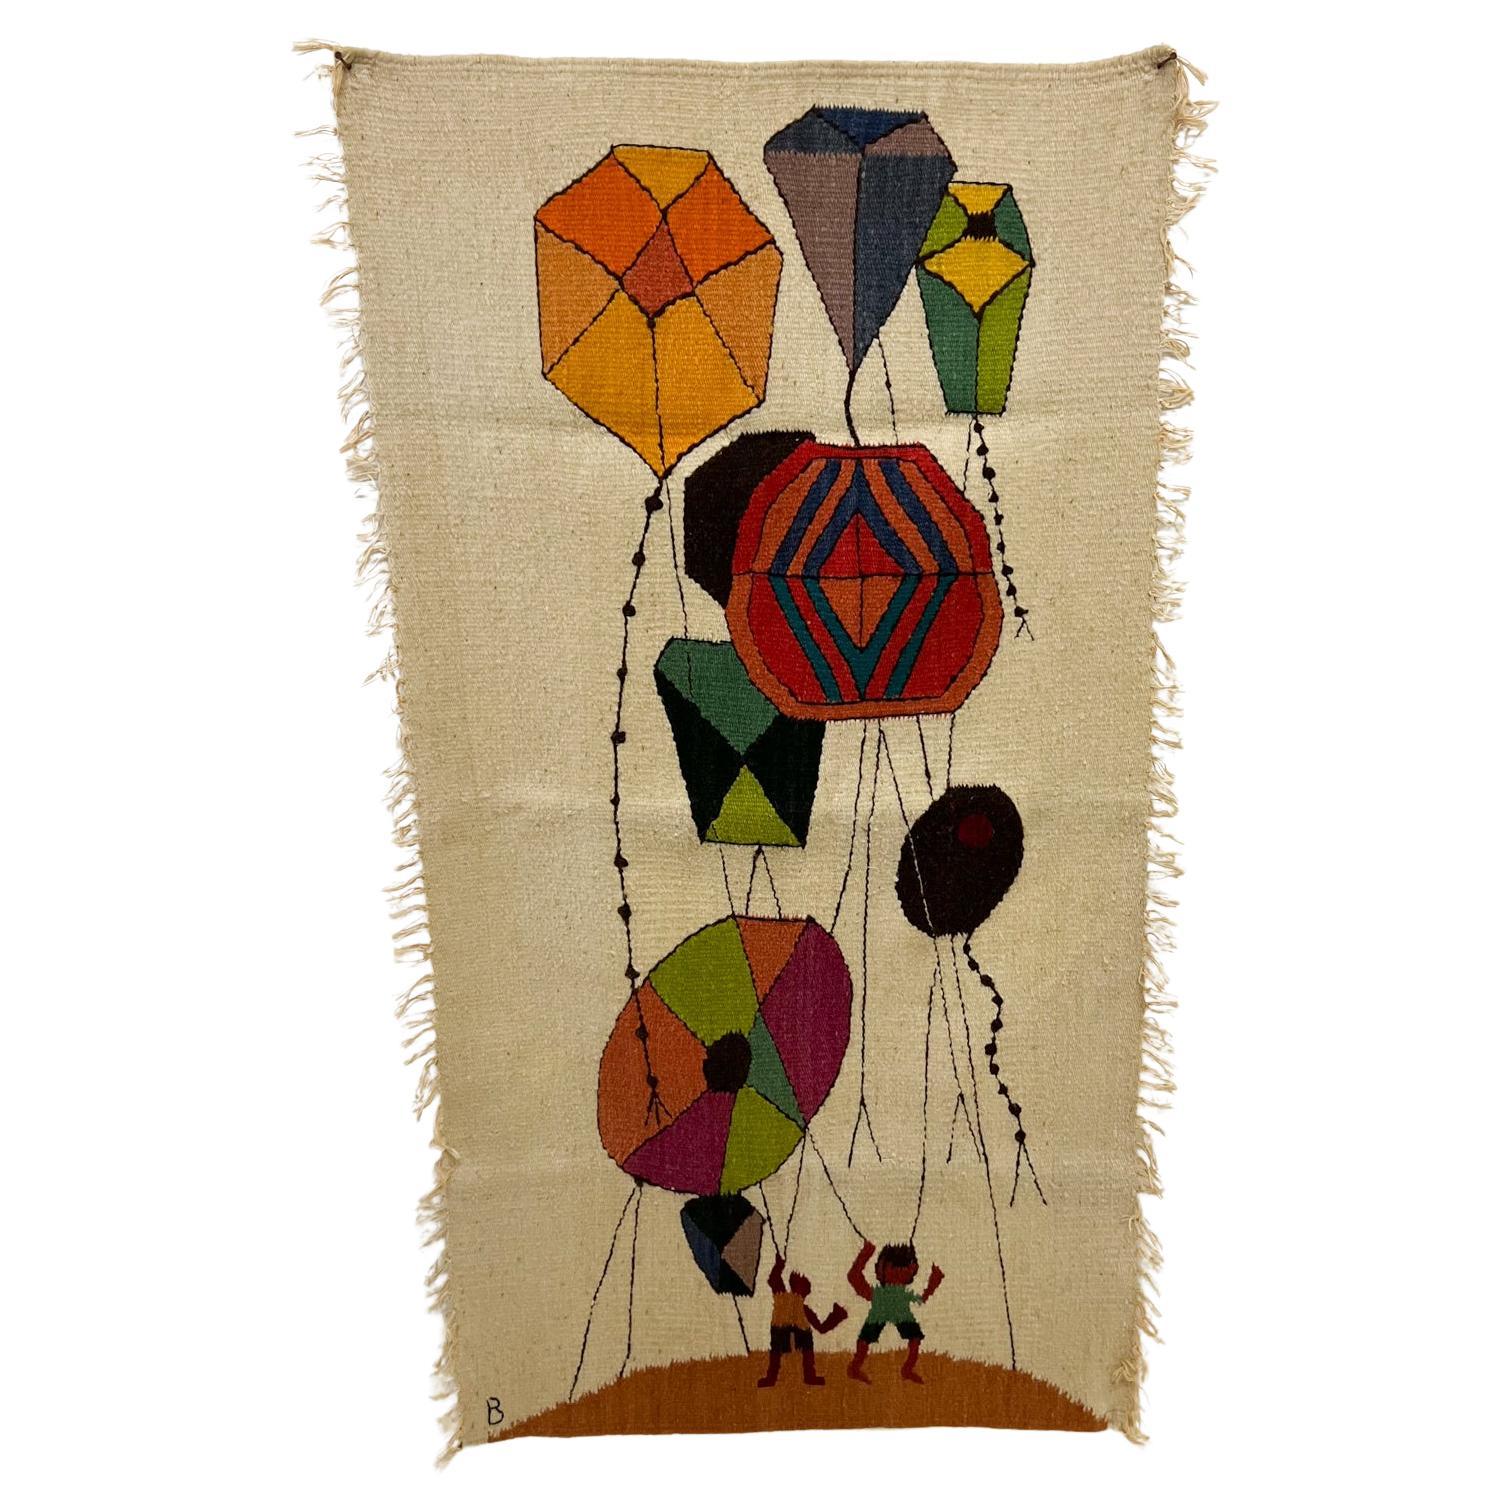 1960s Wall Tapestry Art Modern Graphic Child with Kite in Style of Evelyn Ackerman
Art textile
Signé B
50.5 x 29
État original vintage d'occasion.
Voir les images s'il vous plaît.